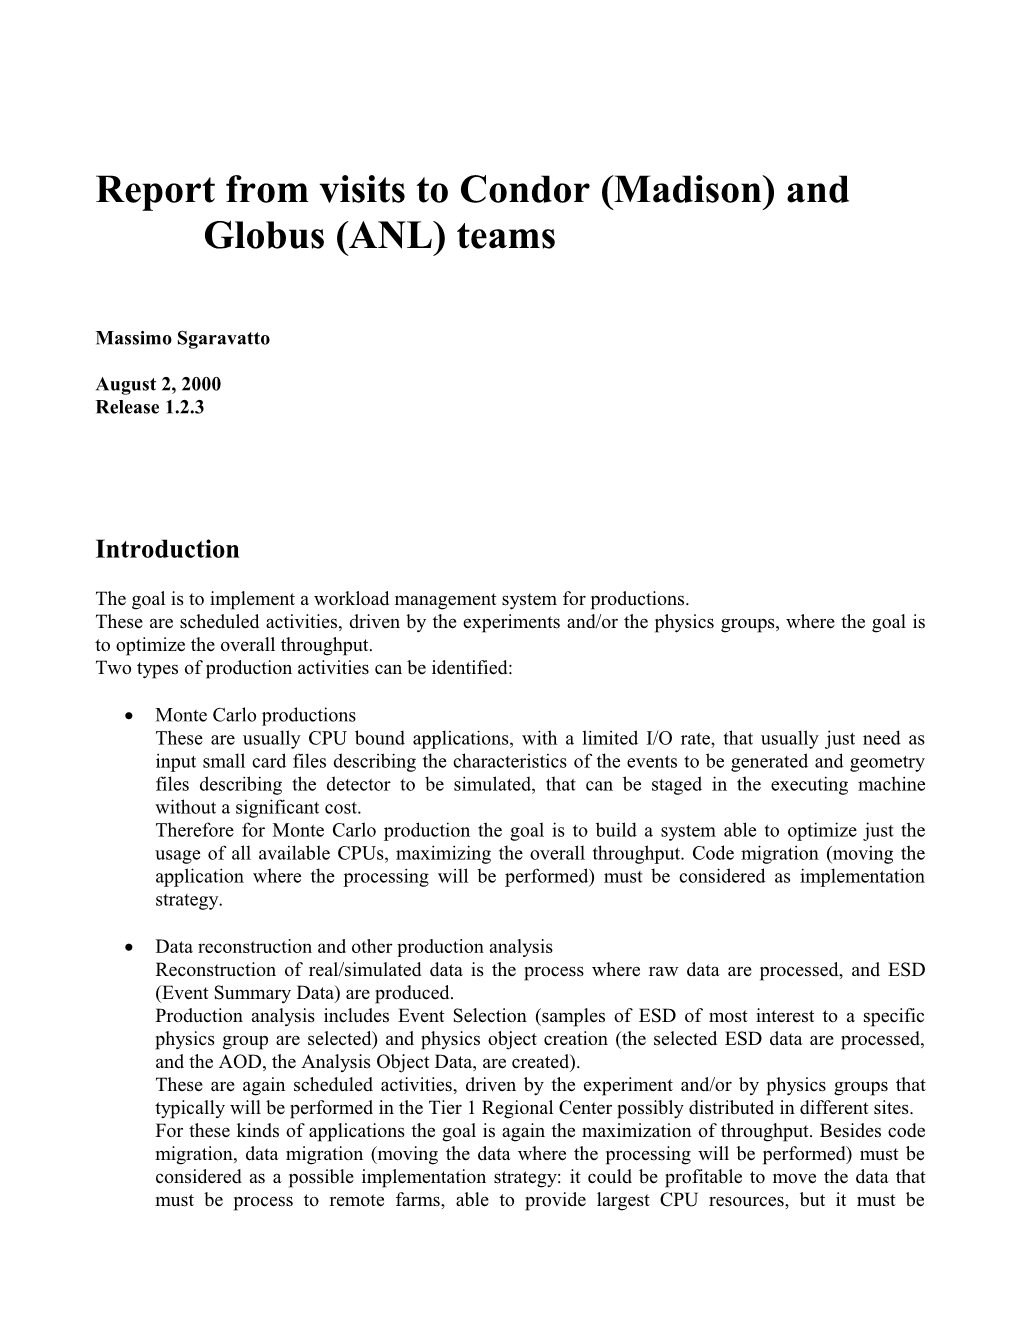 Report from Visits to Condor (Madison) and Globus (ANL) Teams